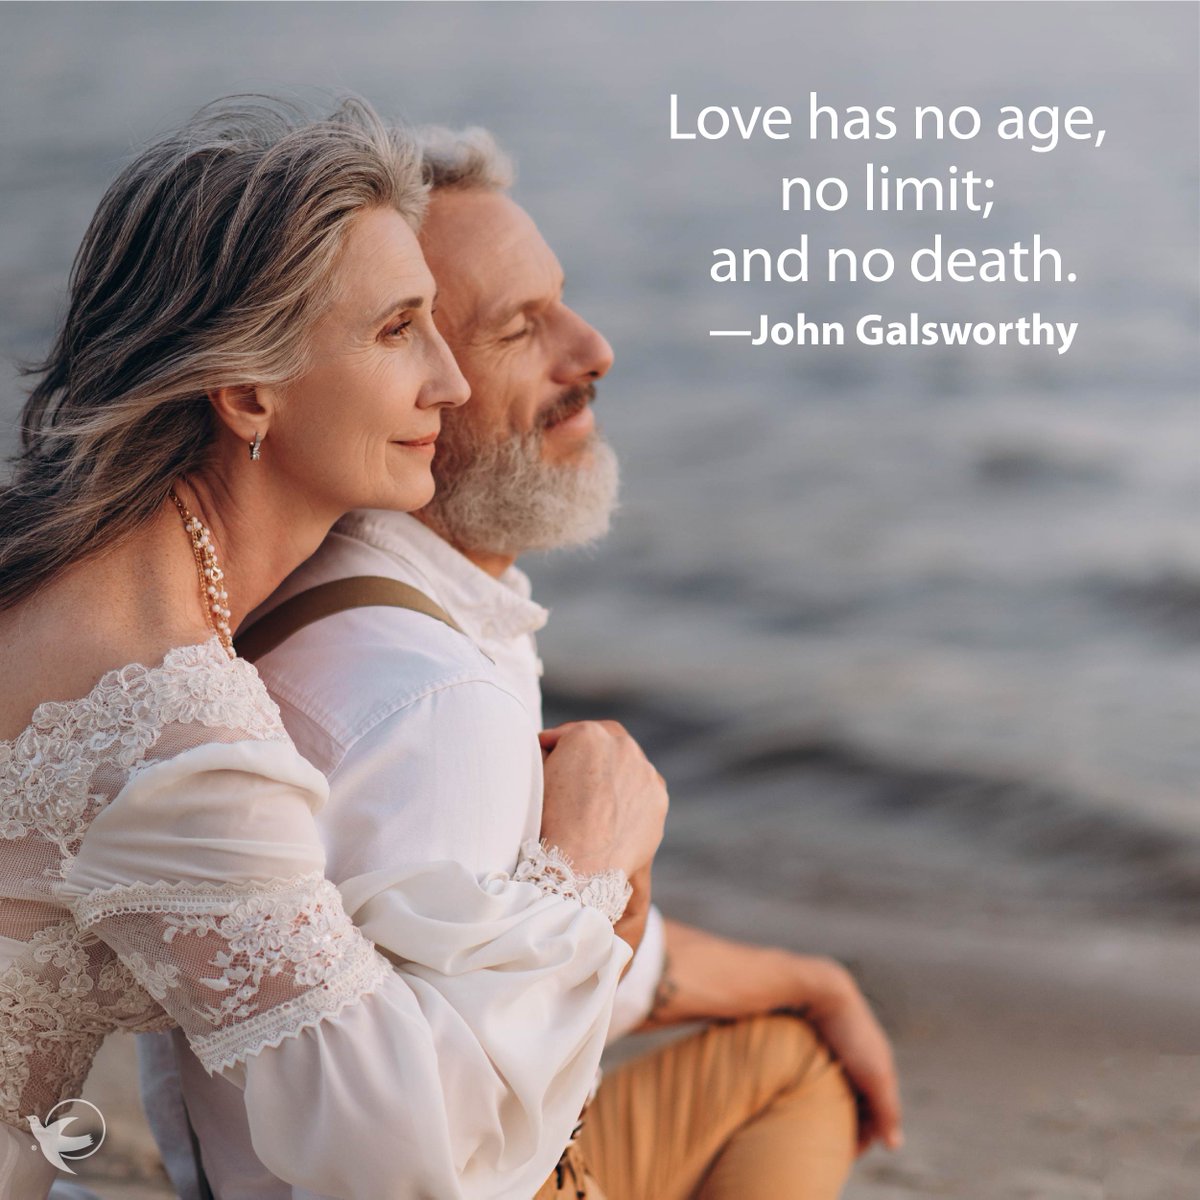 At Senior Home Care by Angels, we believe love knows no age, limits or end. We ensure all our seniors live a healthy & loved life with our carefully chosen caregivers. ❤️🤗  #HomeCare #Caregivers #SeniorHealth Do you know a senior who could use our caring services? 🧓👵